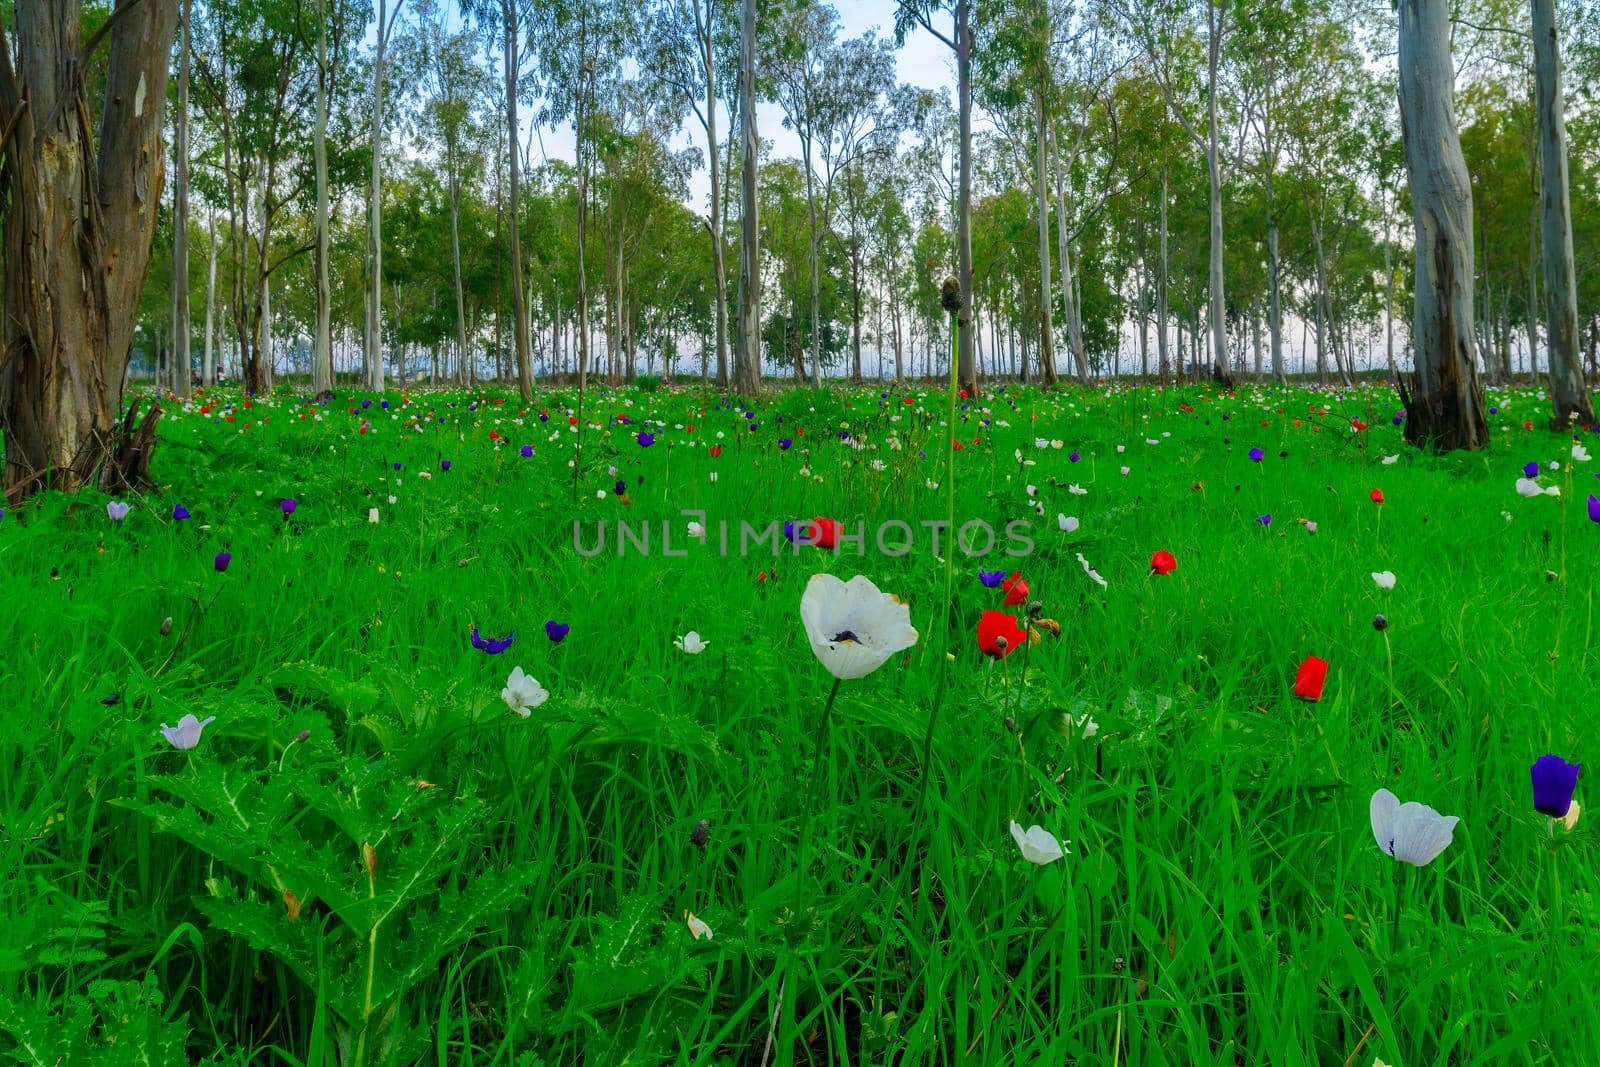 View of colorful Anemone wildflowers in a Eucalyptus grove, near Megiddo, Northern Israel